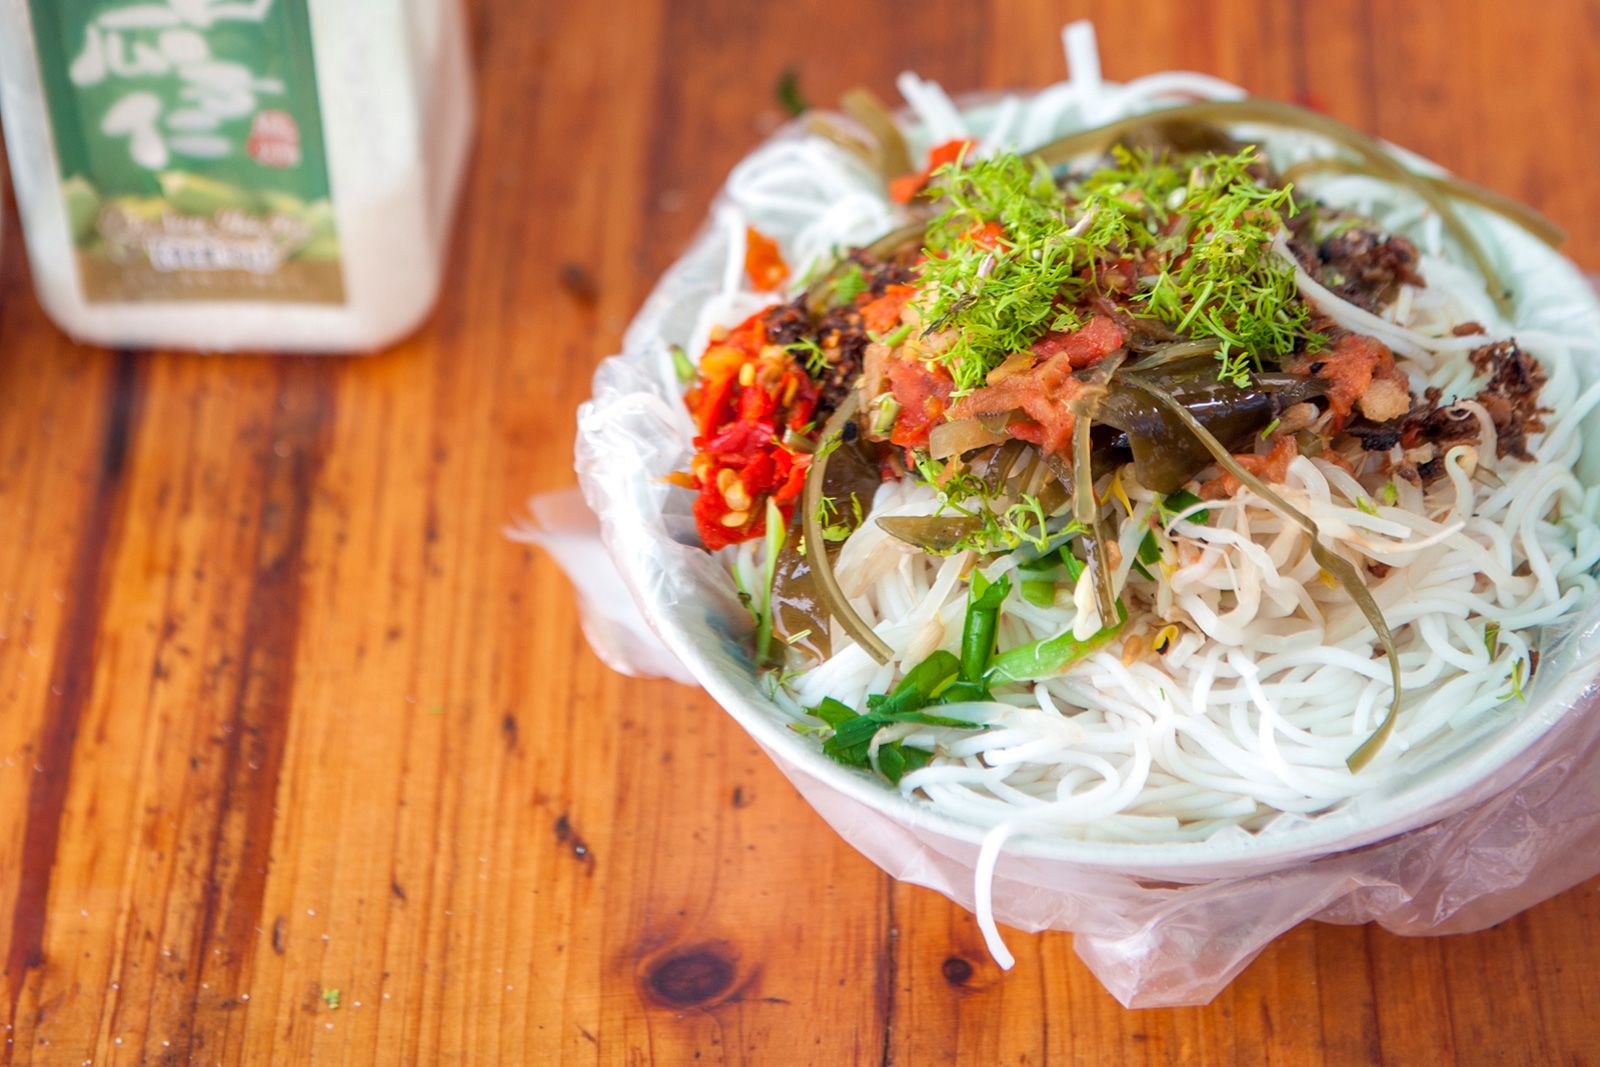 JINGHONG, YUNNAN, CHINA - 2014/09/20: Cold noodles with vinegar and sesame in the southern Yunnan city of Jinghong. (Photo by Leisa Tyler/LightRocket via Getty Images)